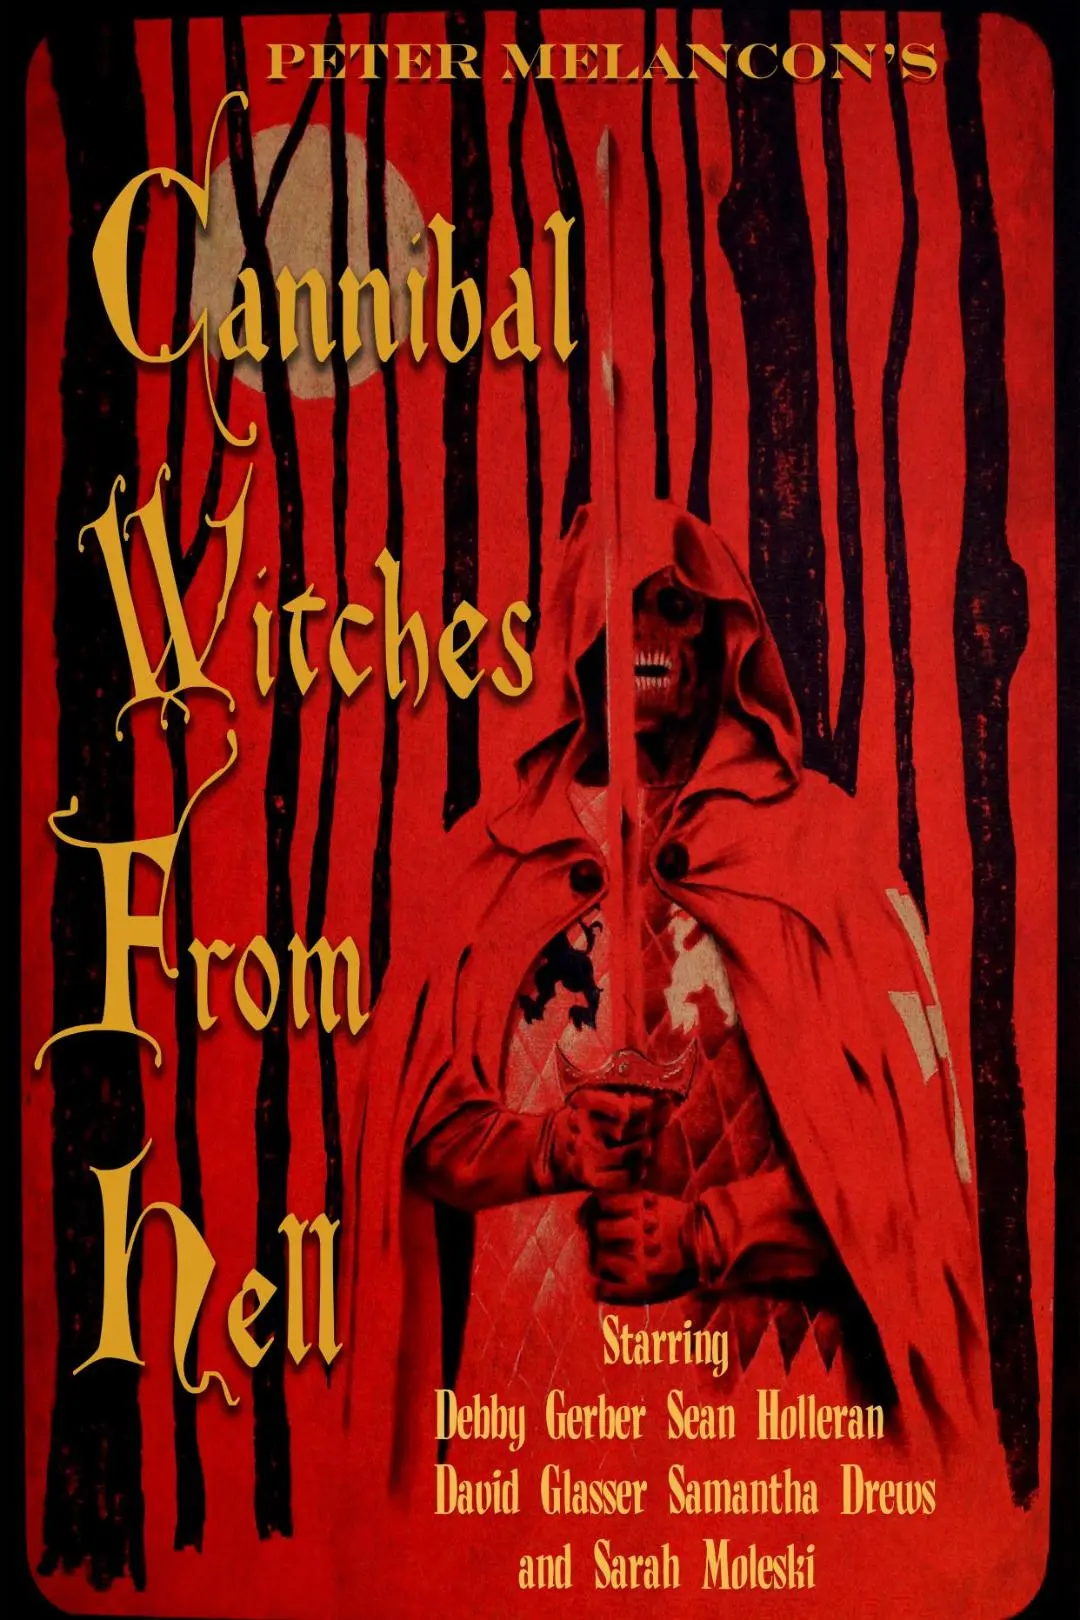 Cannibal Witches from Hell_peliplat